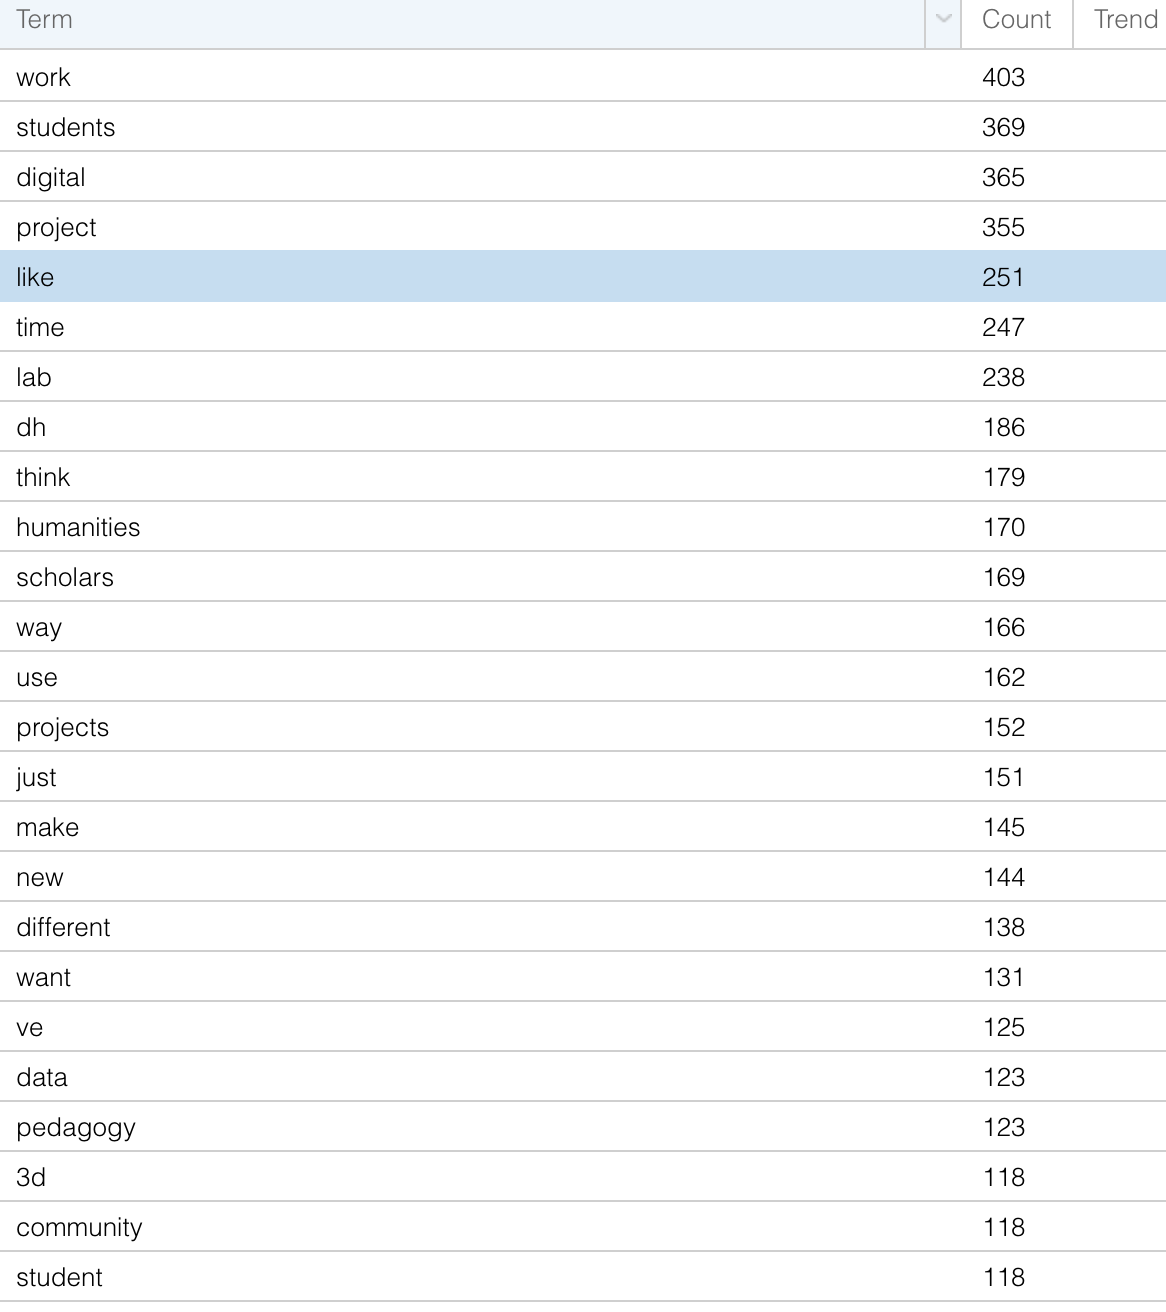 Table of most frequently occuring terms in 2019 blog posts on our blog